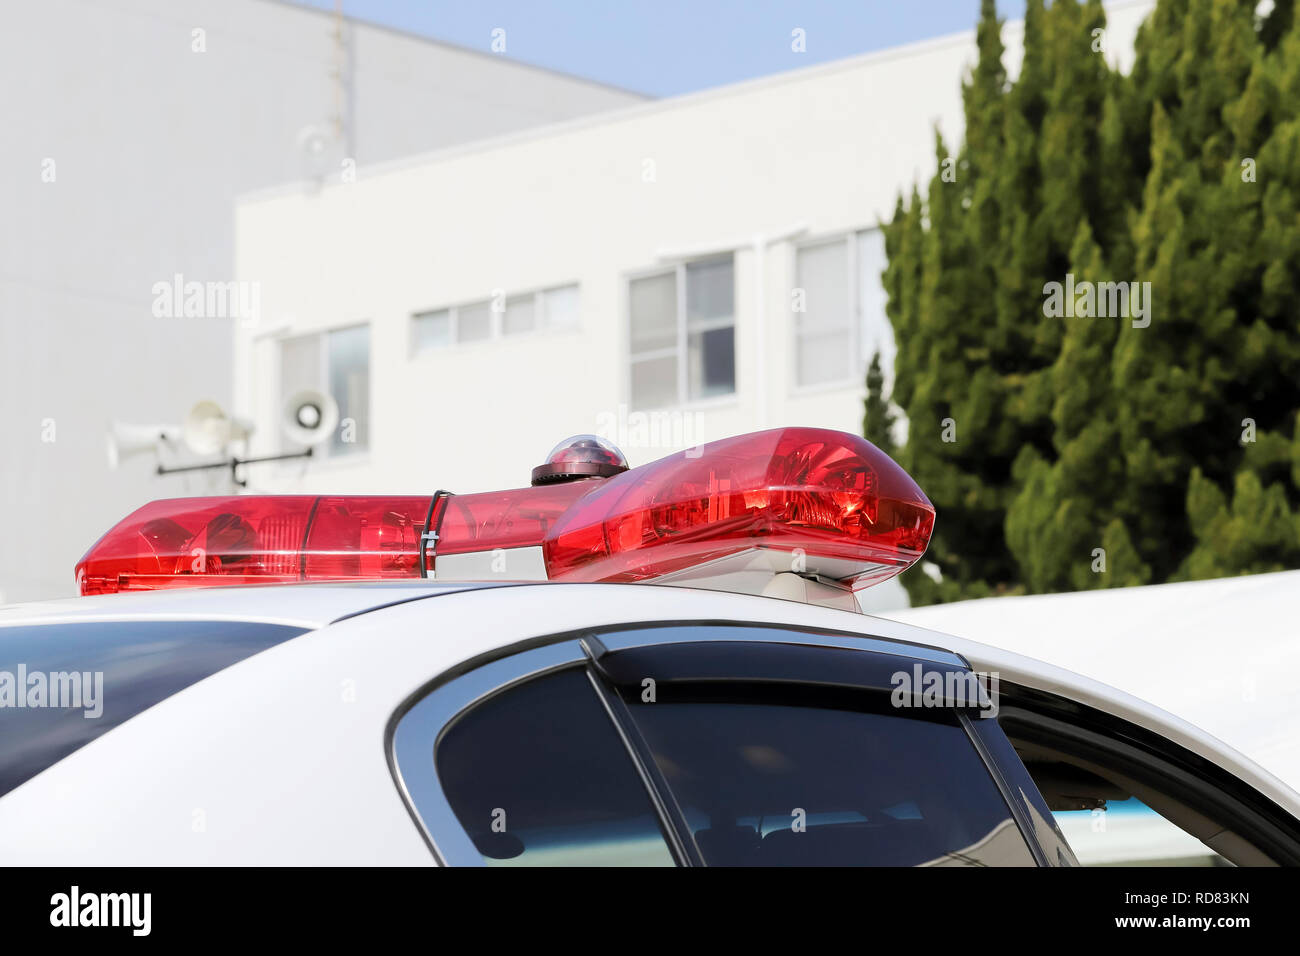 Closeup of the body of the Japanese police car with a sign POLICE Stock Photo